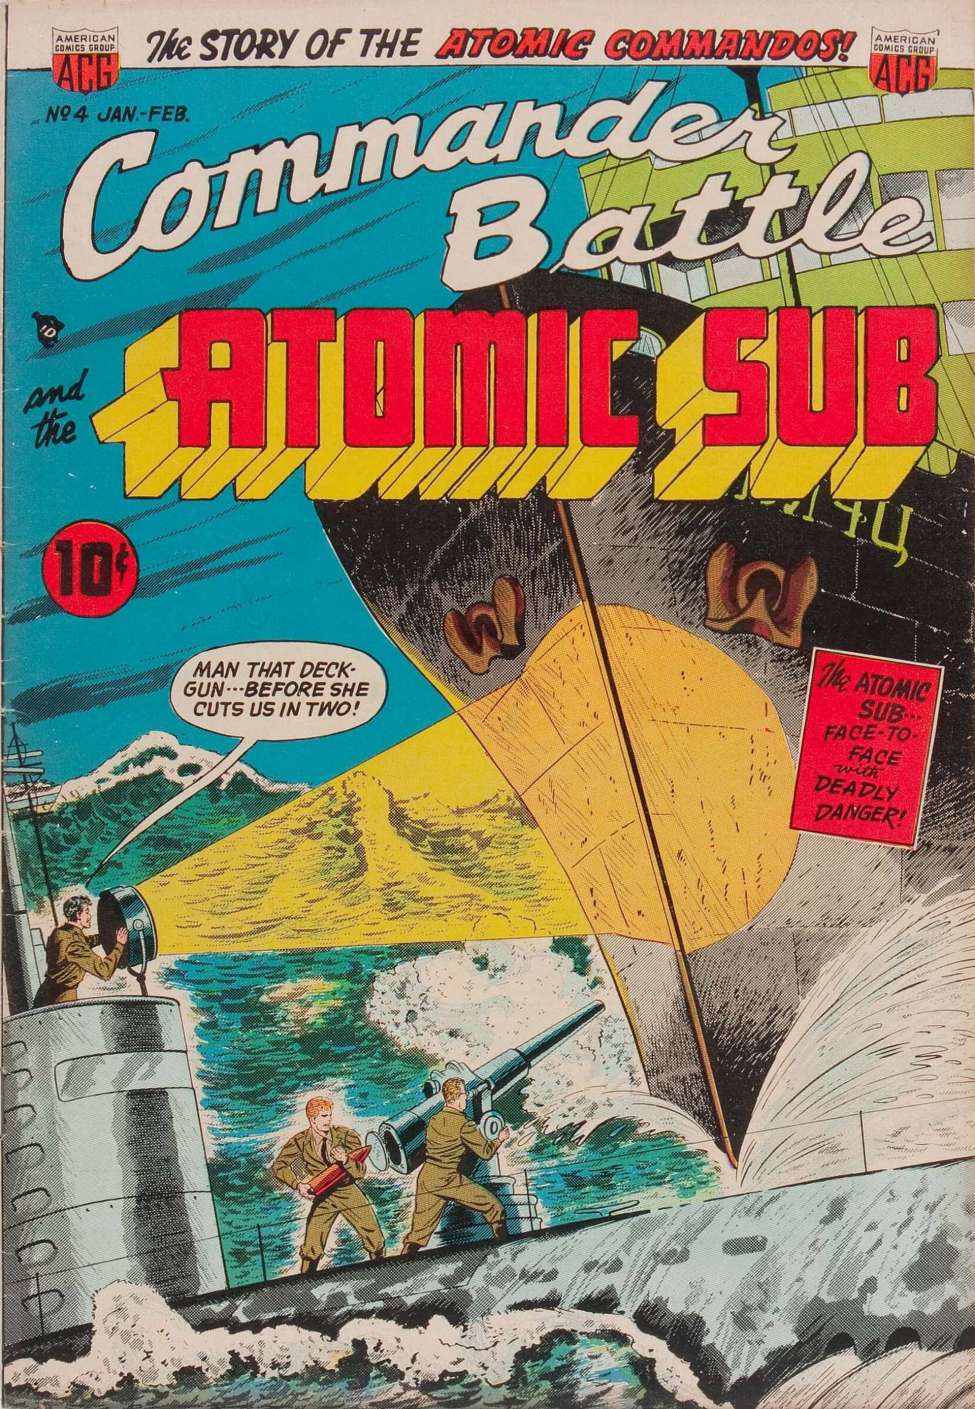 Comic Book Cover For Commander Battle and the Atomic Sub 4